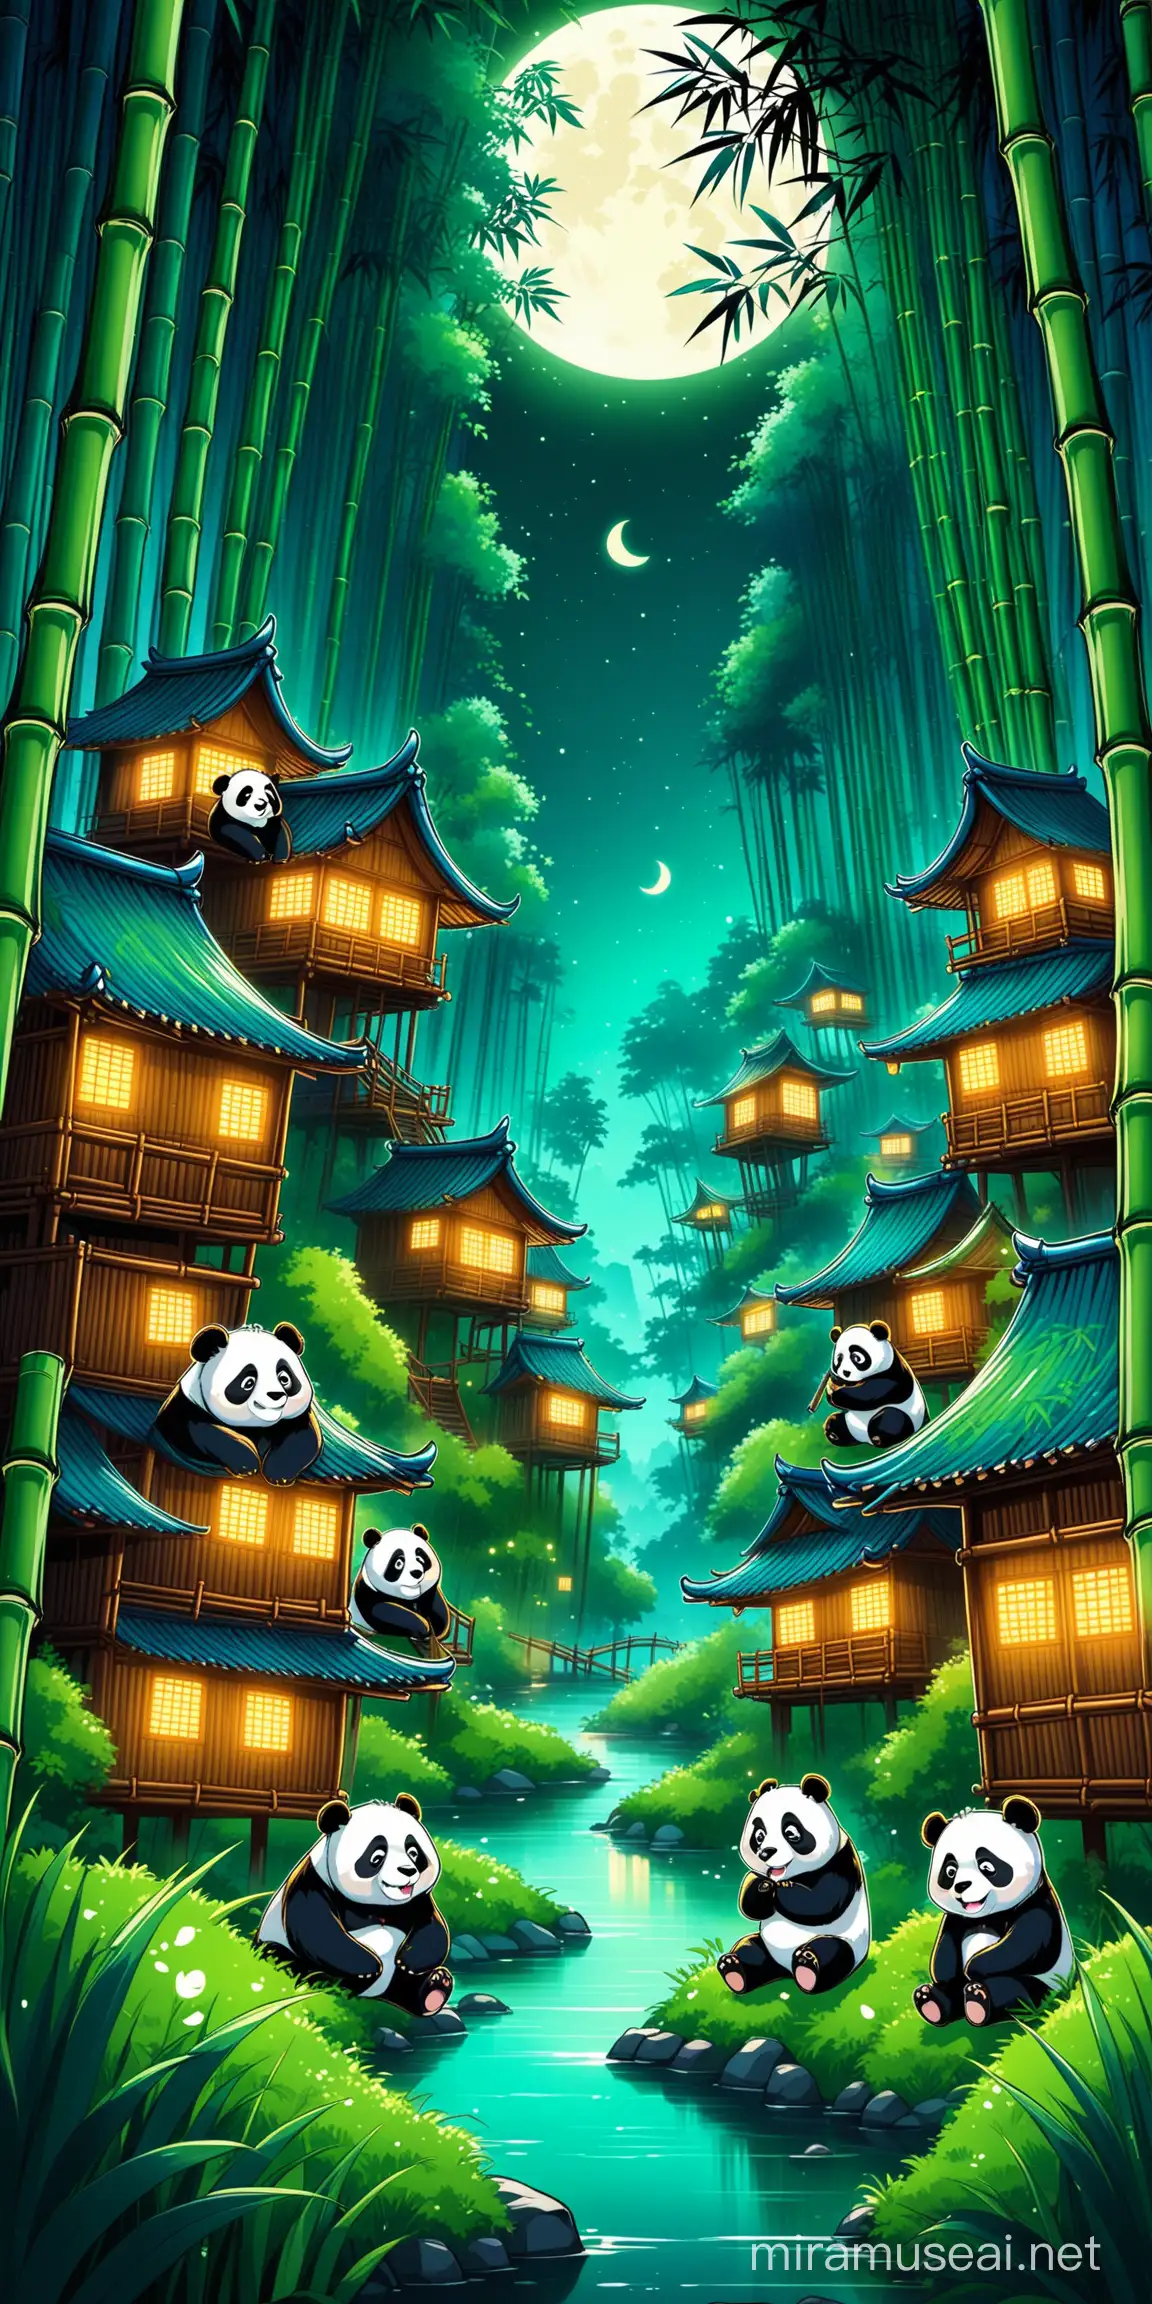 Cartoon forest of houses dark night view with sets of pandas with logo Bamboo GNGA